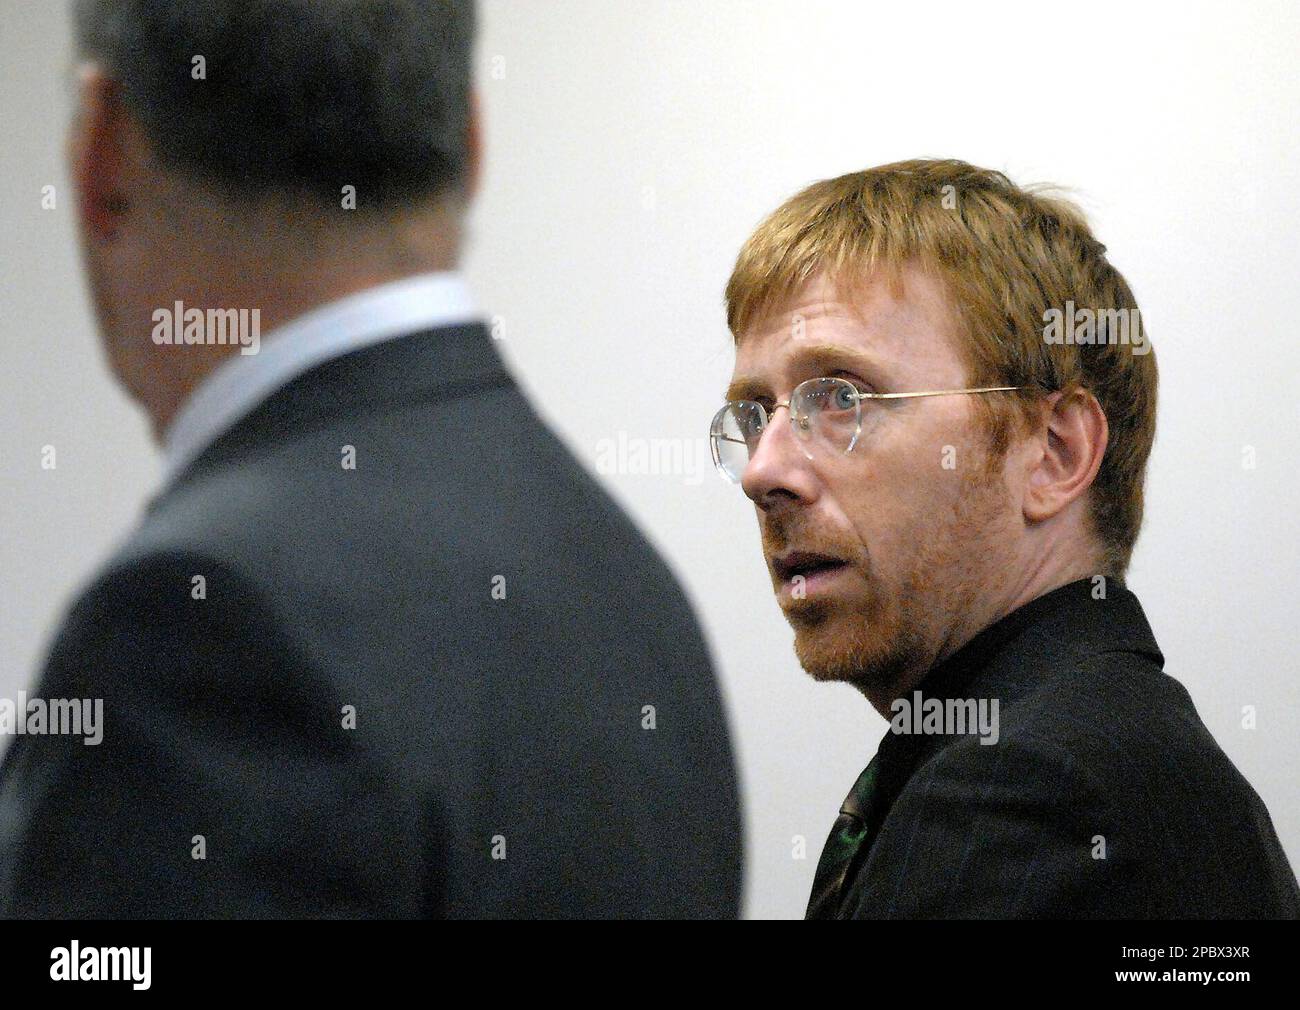 Former Phish singer Trey Anastasio , right , talks with his lawyer Steve Coffey during Anastasio's appearance in Washington County court in Fort Edward, N.Y, Tuesday afternoon, Feb. 27, 2007. Arrested on drug charges during a Dec. 15 traffic stop, Anastasio pleaded not guilty Tuesday and was released on bail. (AP Photo/The Post Star, Erin Reid Coker) Stock Photo